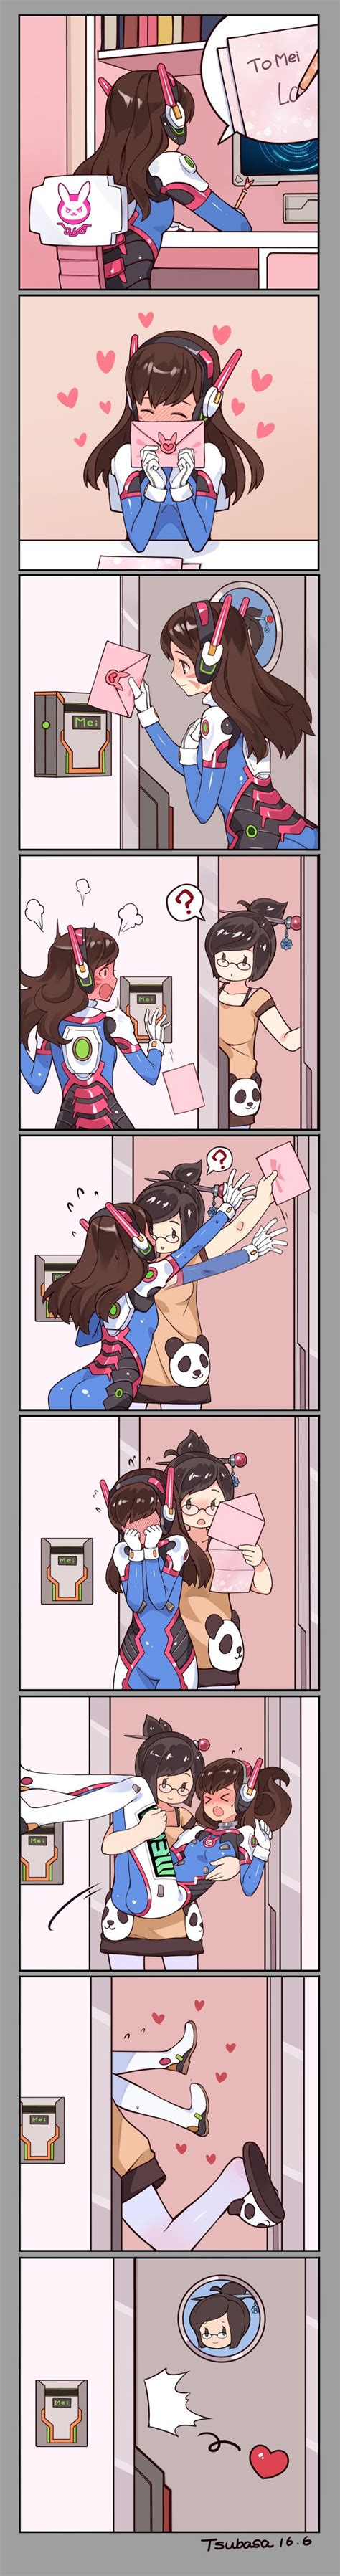 17 best images about overwatch on pinterest funny